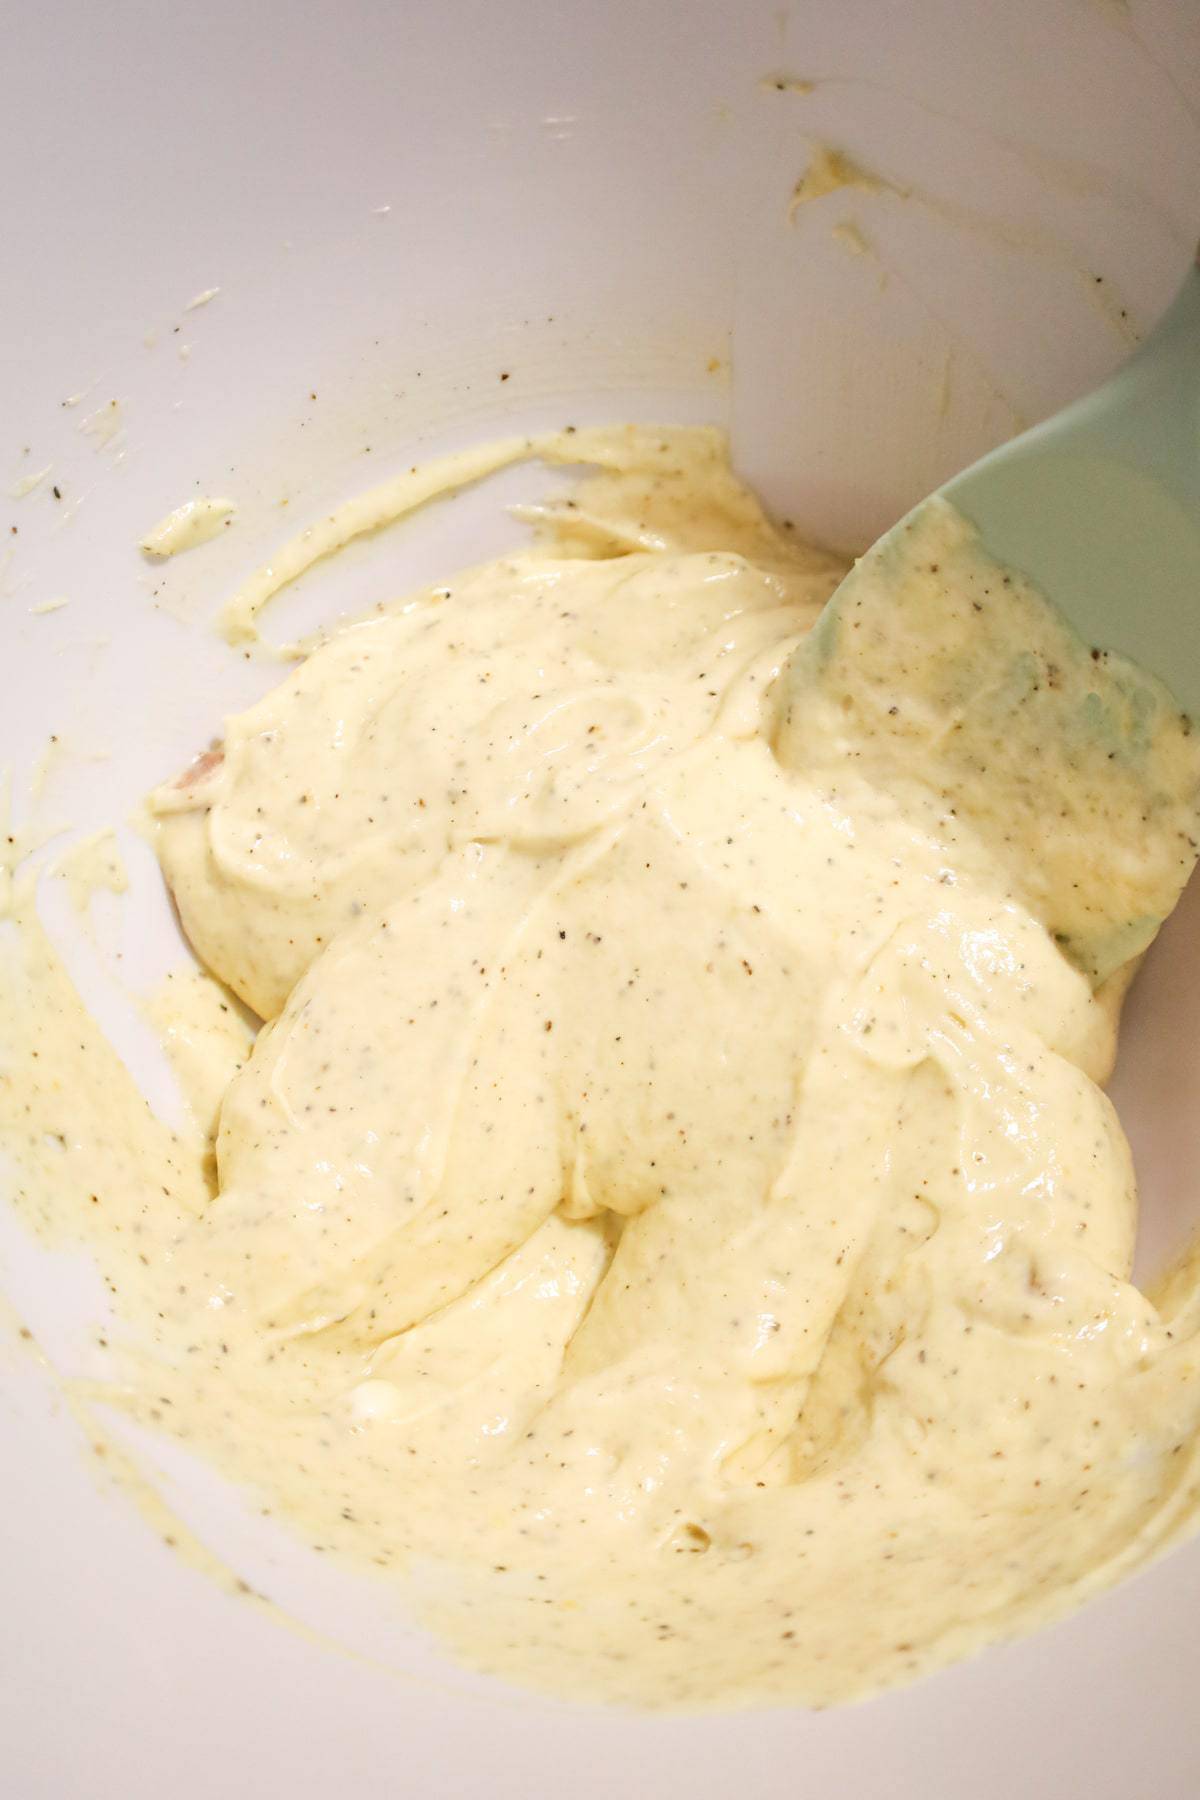 sour cream and condensed cream of chicken soup mixture in a mixing bowl